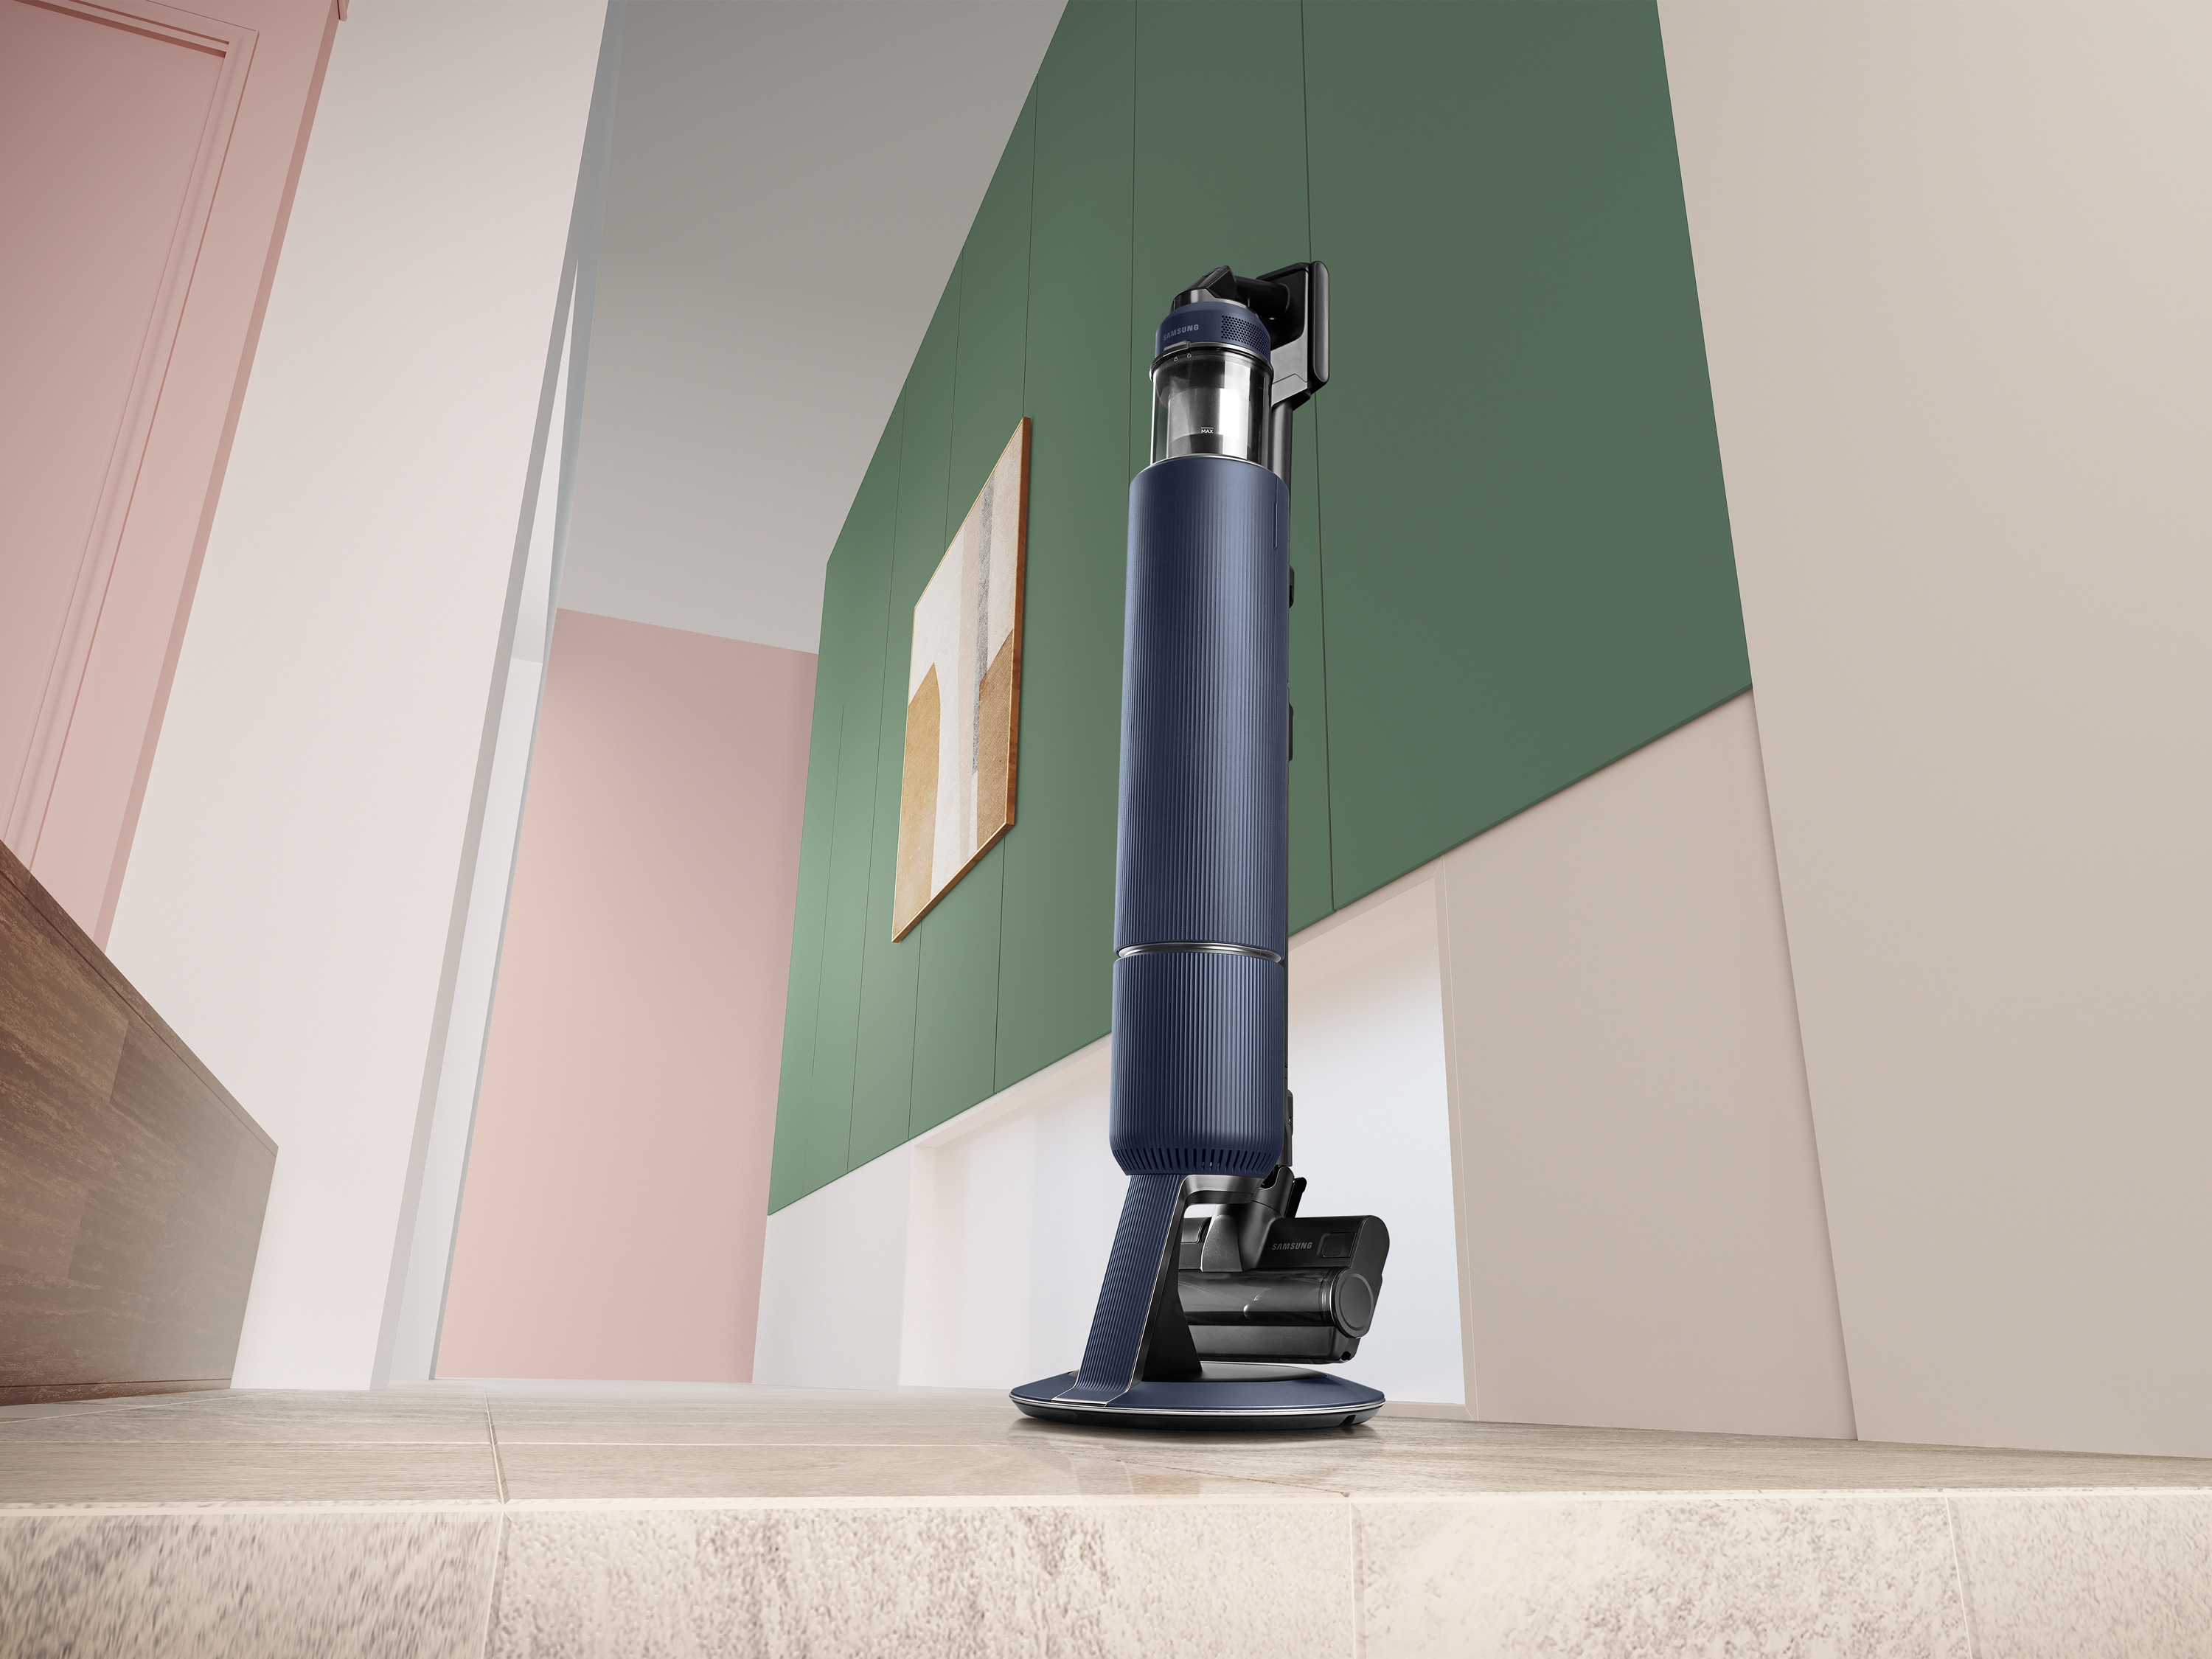 Samsung launches new cordless vacuum cleaner with LCD Digital Display, lightweight design